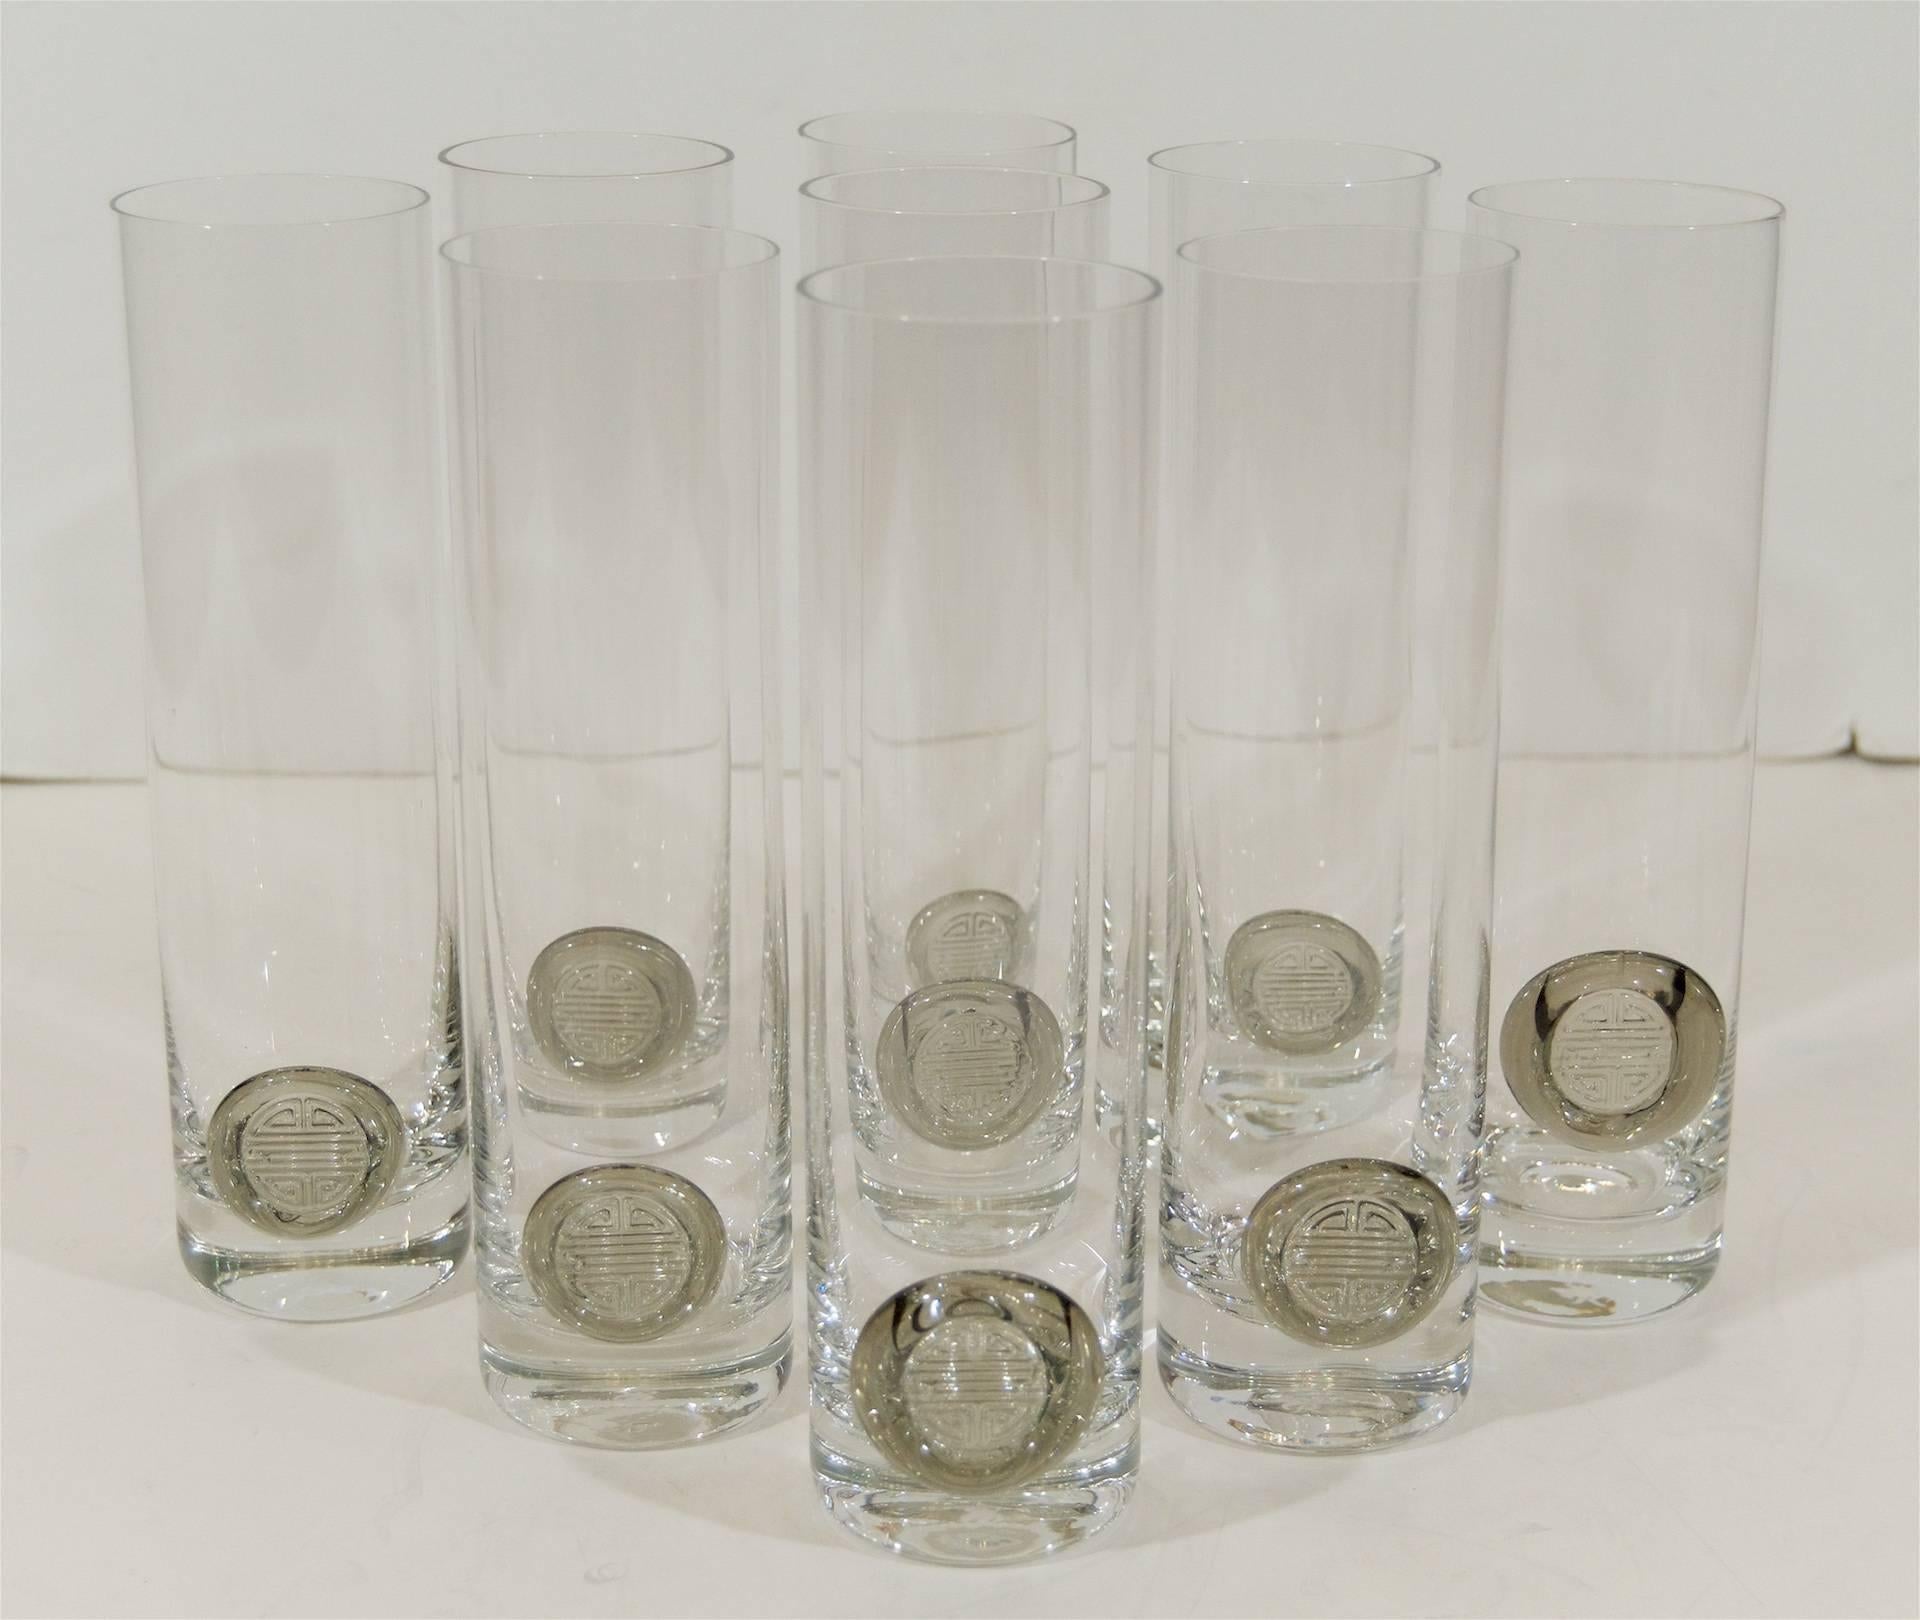 Set of nine large Rosenthal crystal beer glasses, hold approximately 20 ounces.

